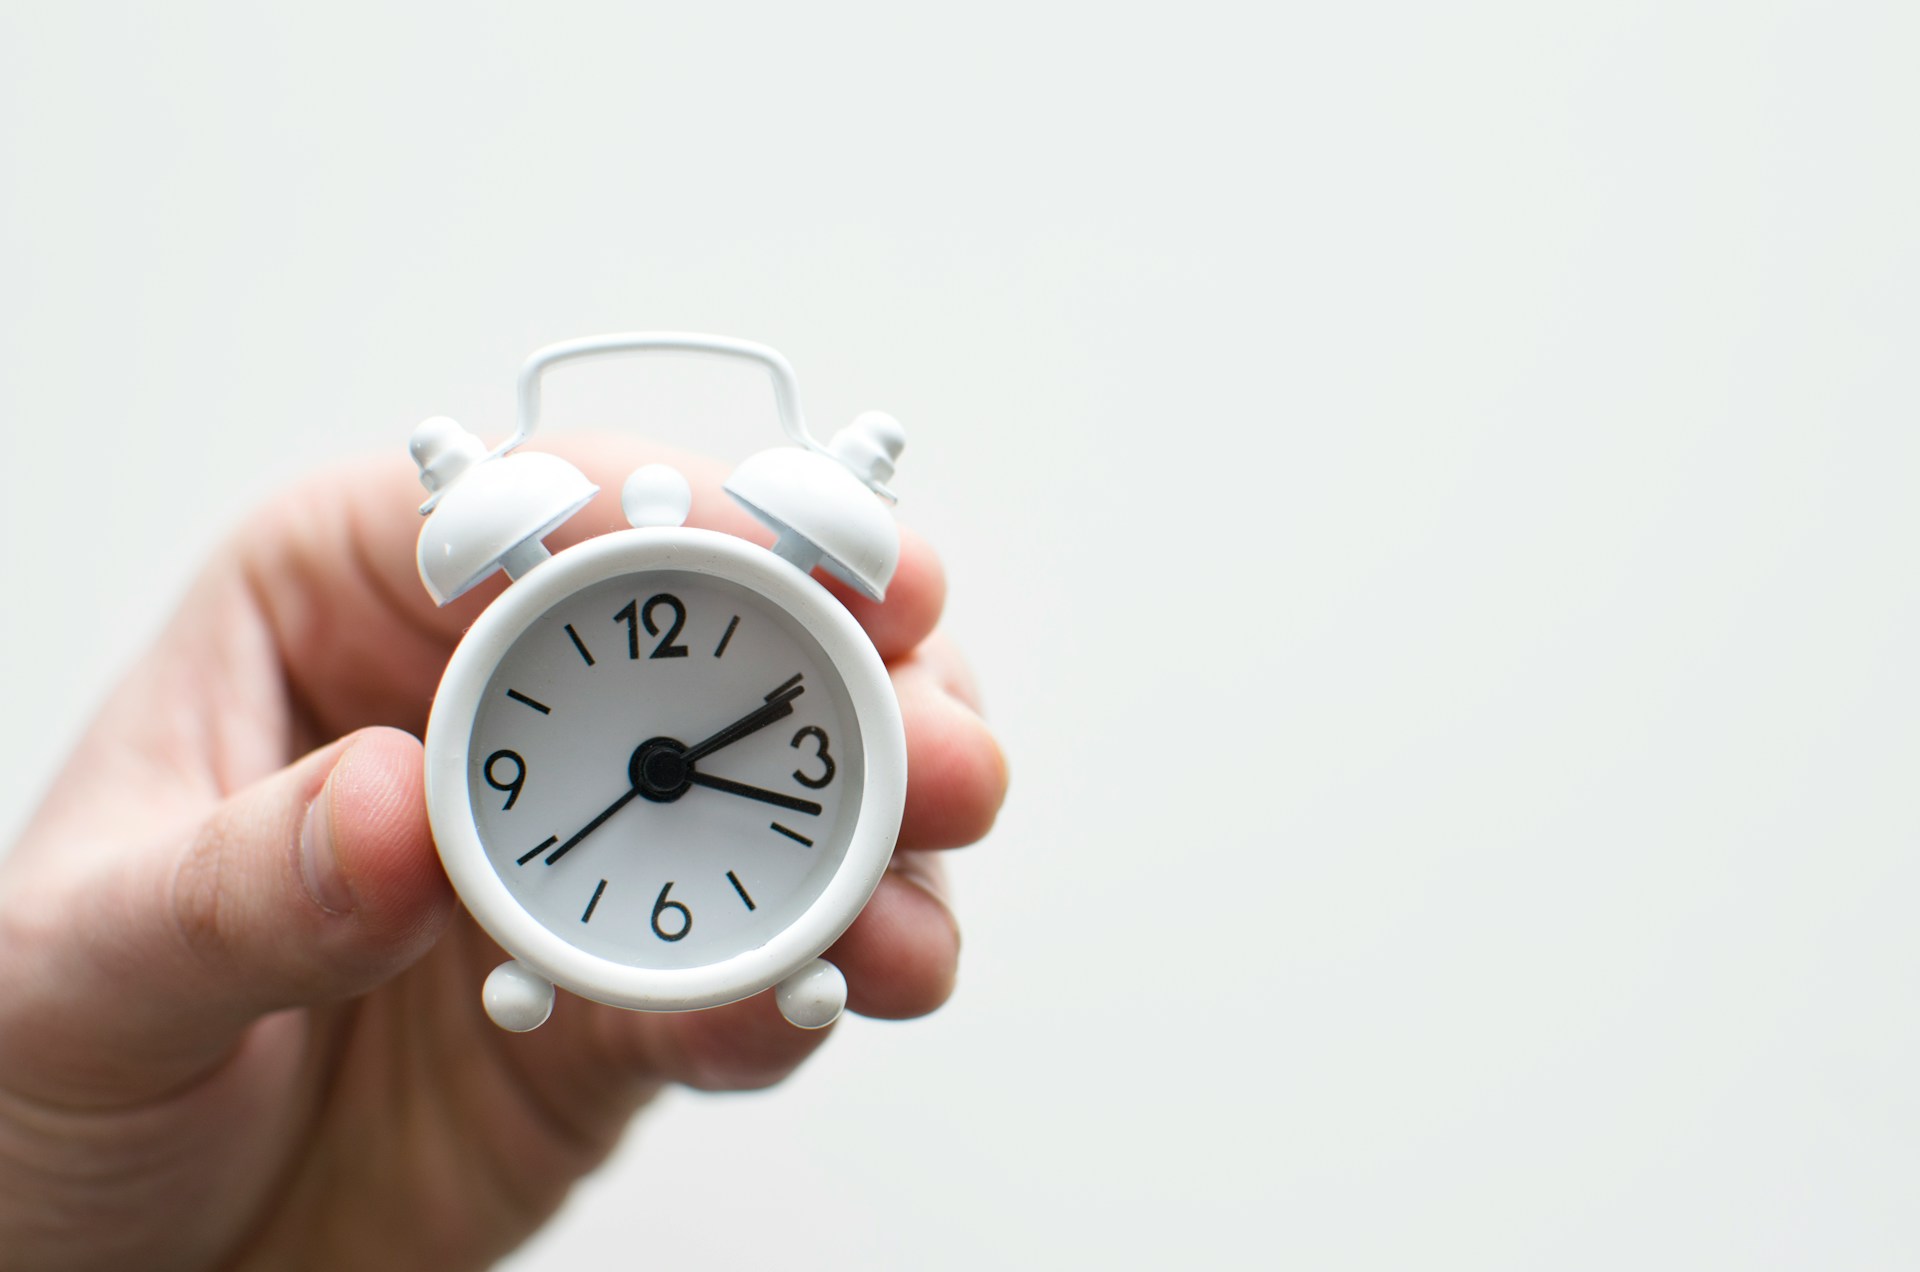 A hand holding a tiny, white alarm clock with the time set to 2:18. executive assistant daily checklist